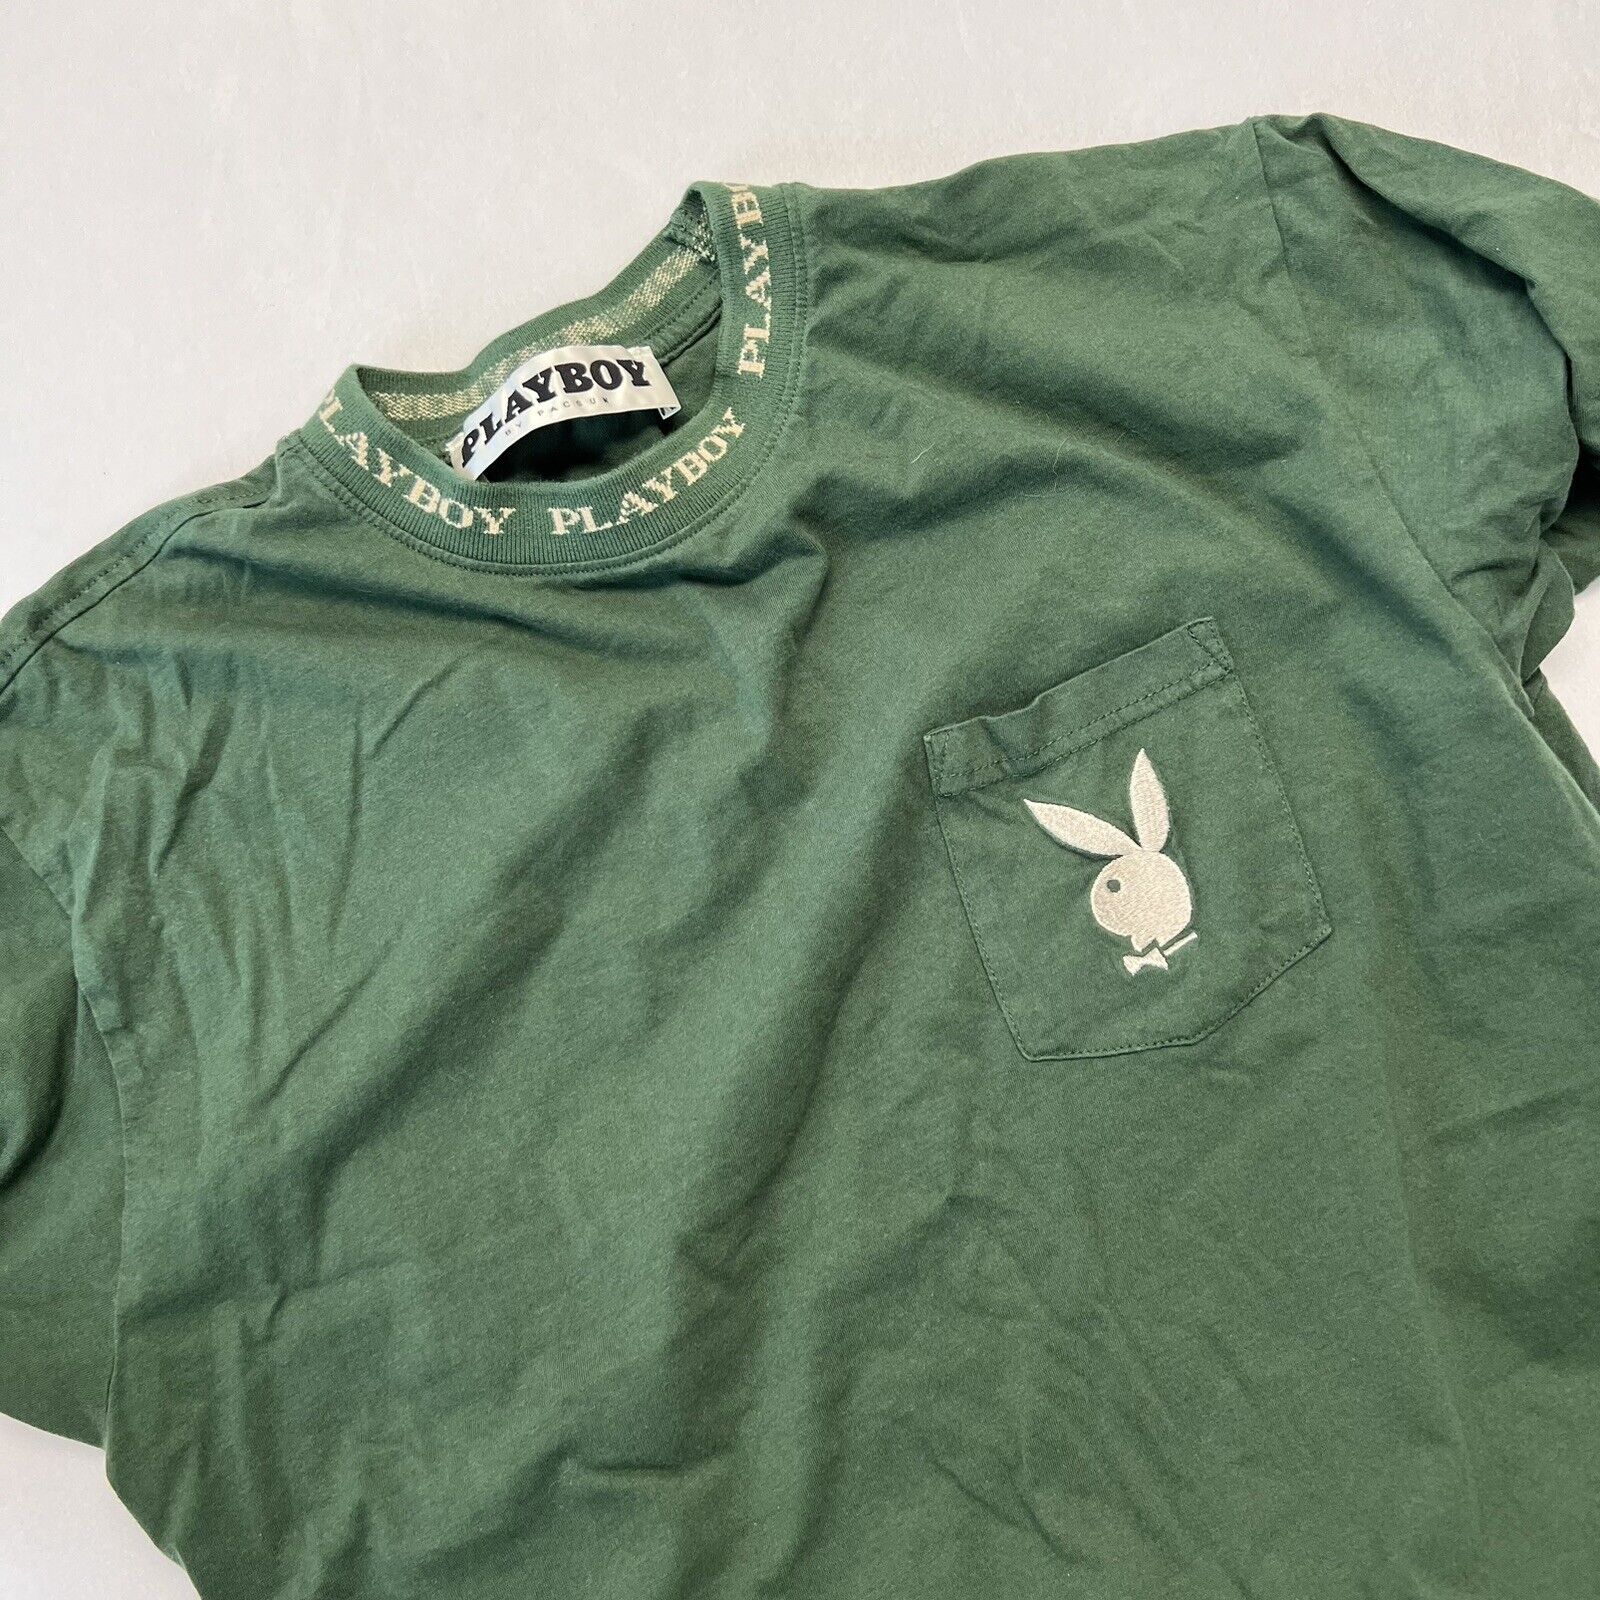 Playboy by Pacsun Green T-Shirt size M - image 5